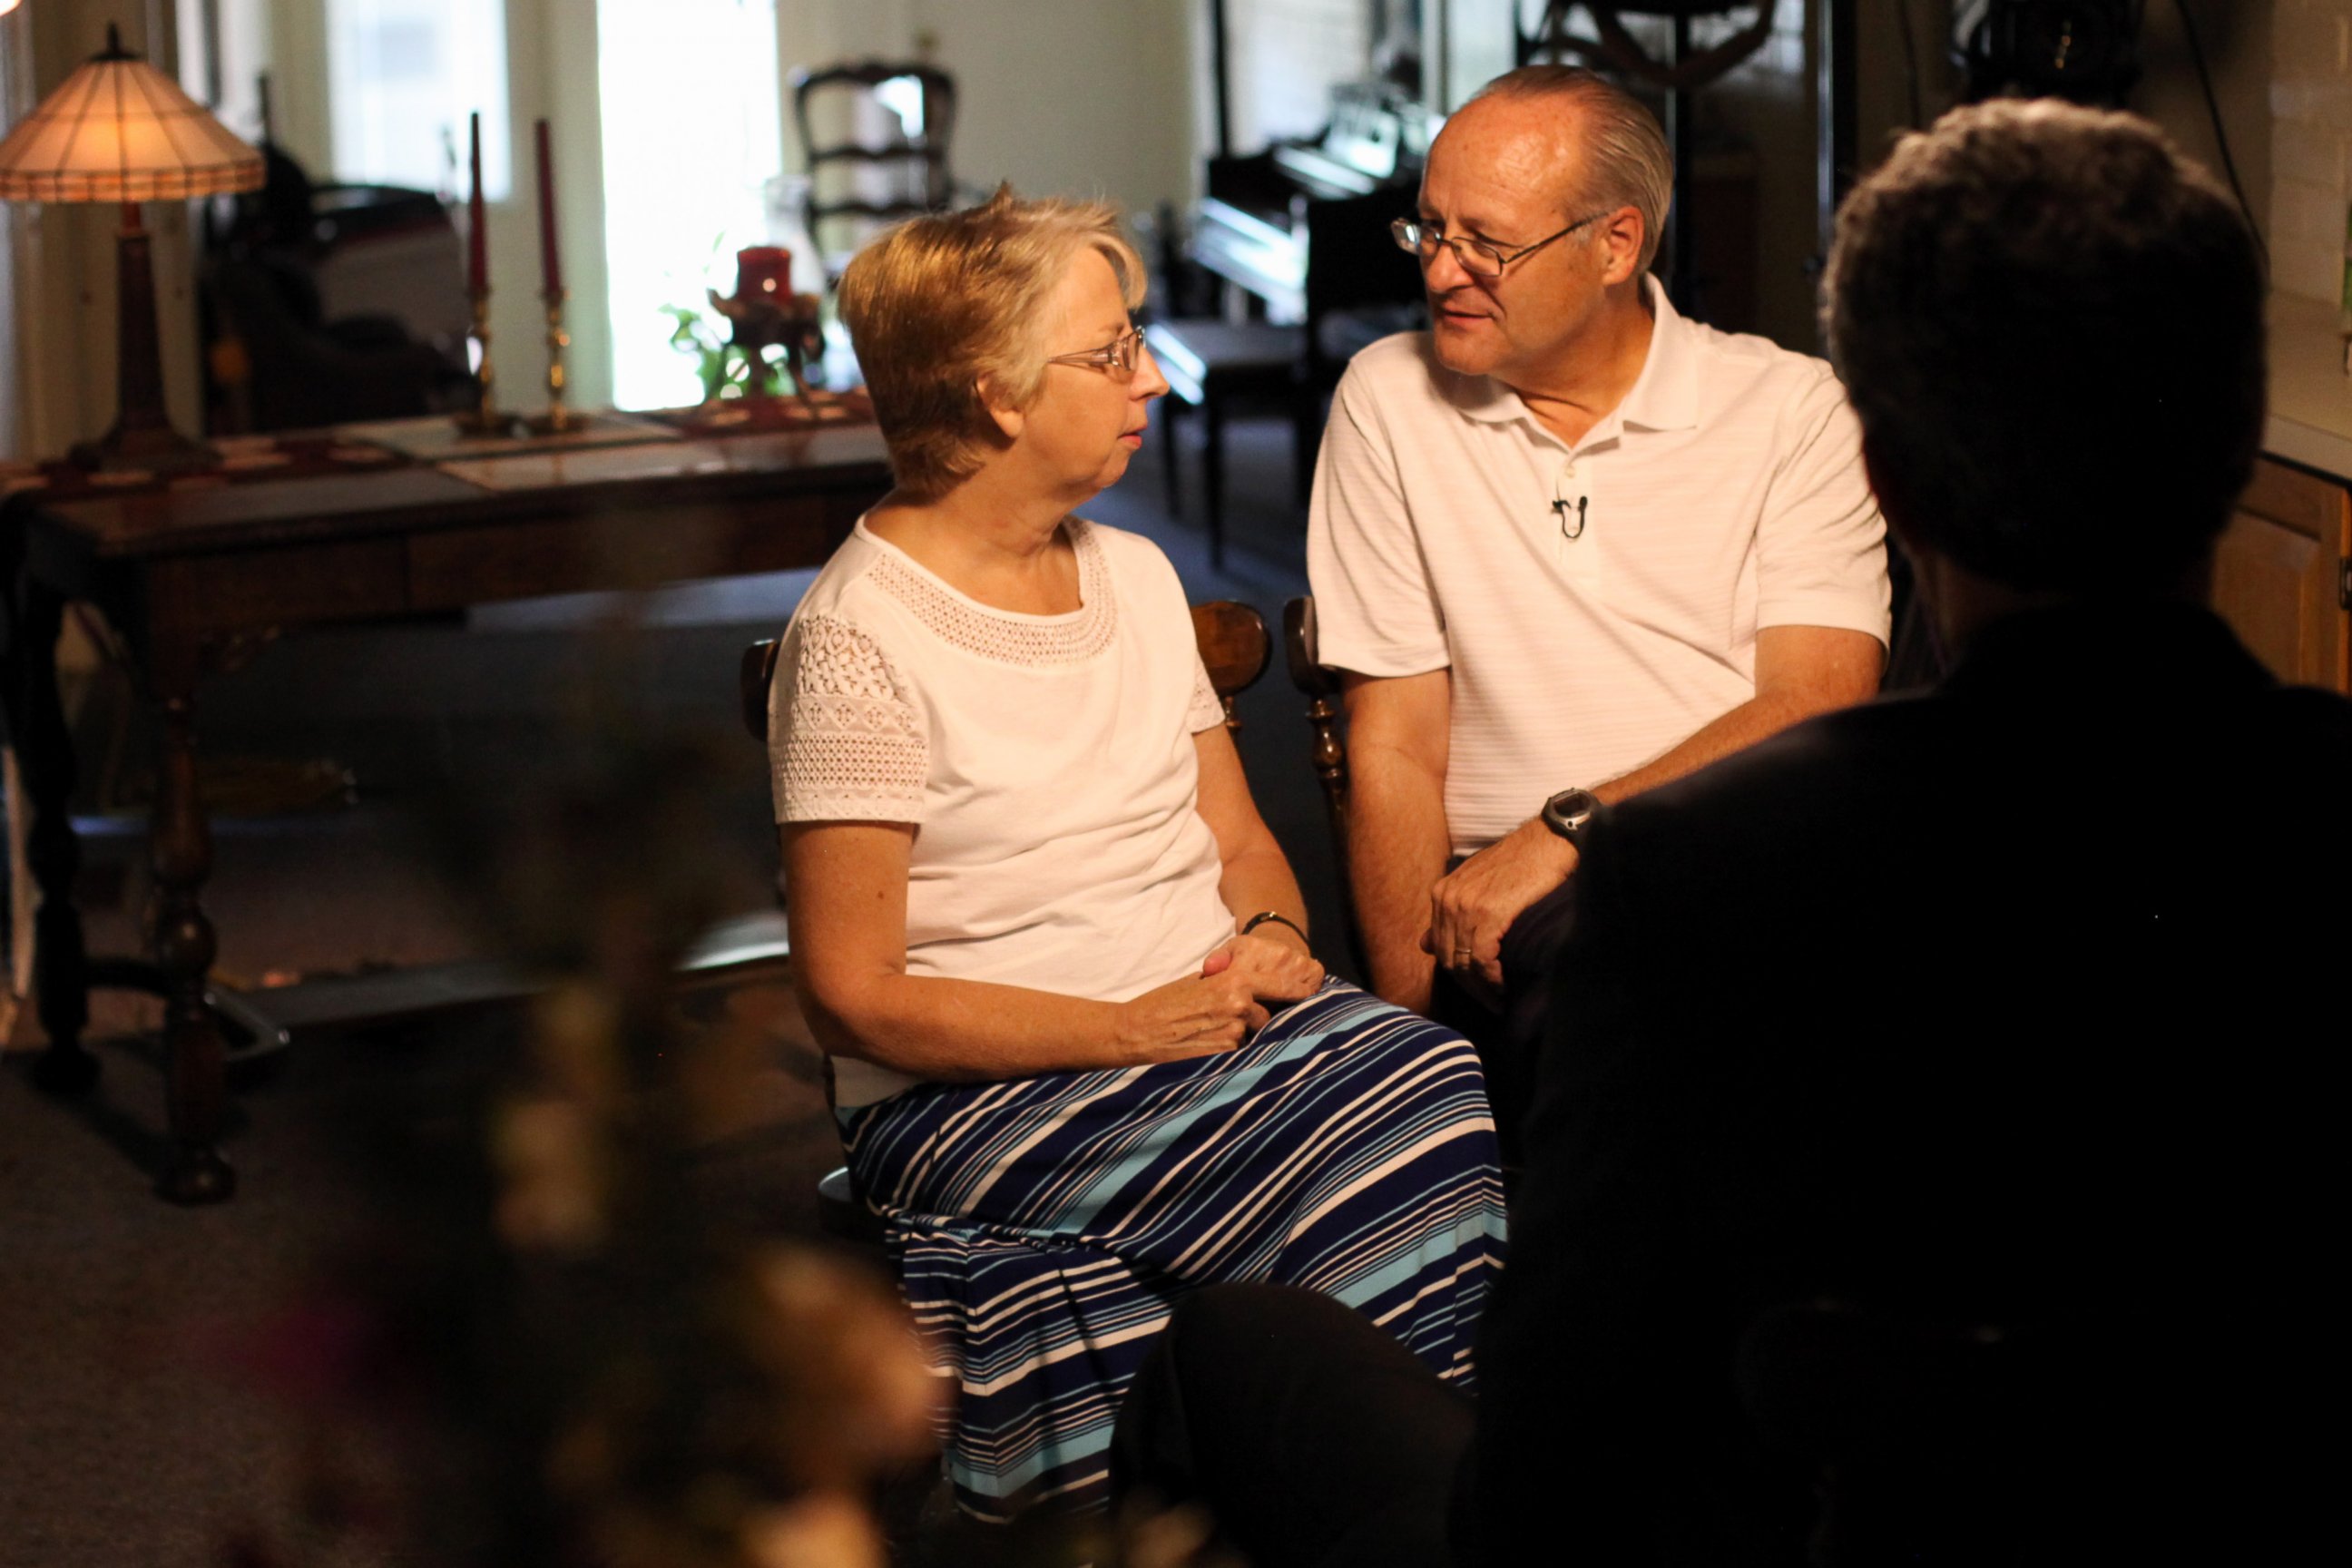 PHOTO: Nancy Writebol, pictured with her husband, David, contracted Ebola while working as a missionary in Liberia.
